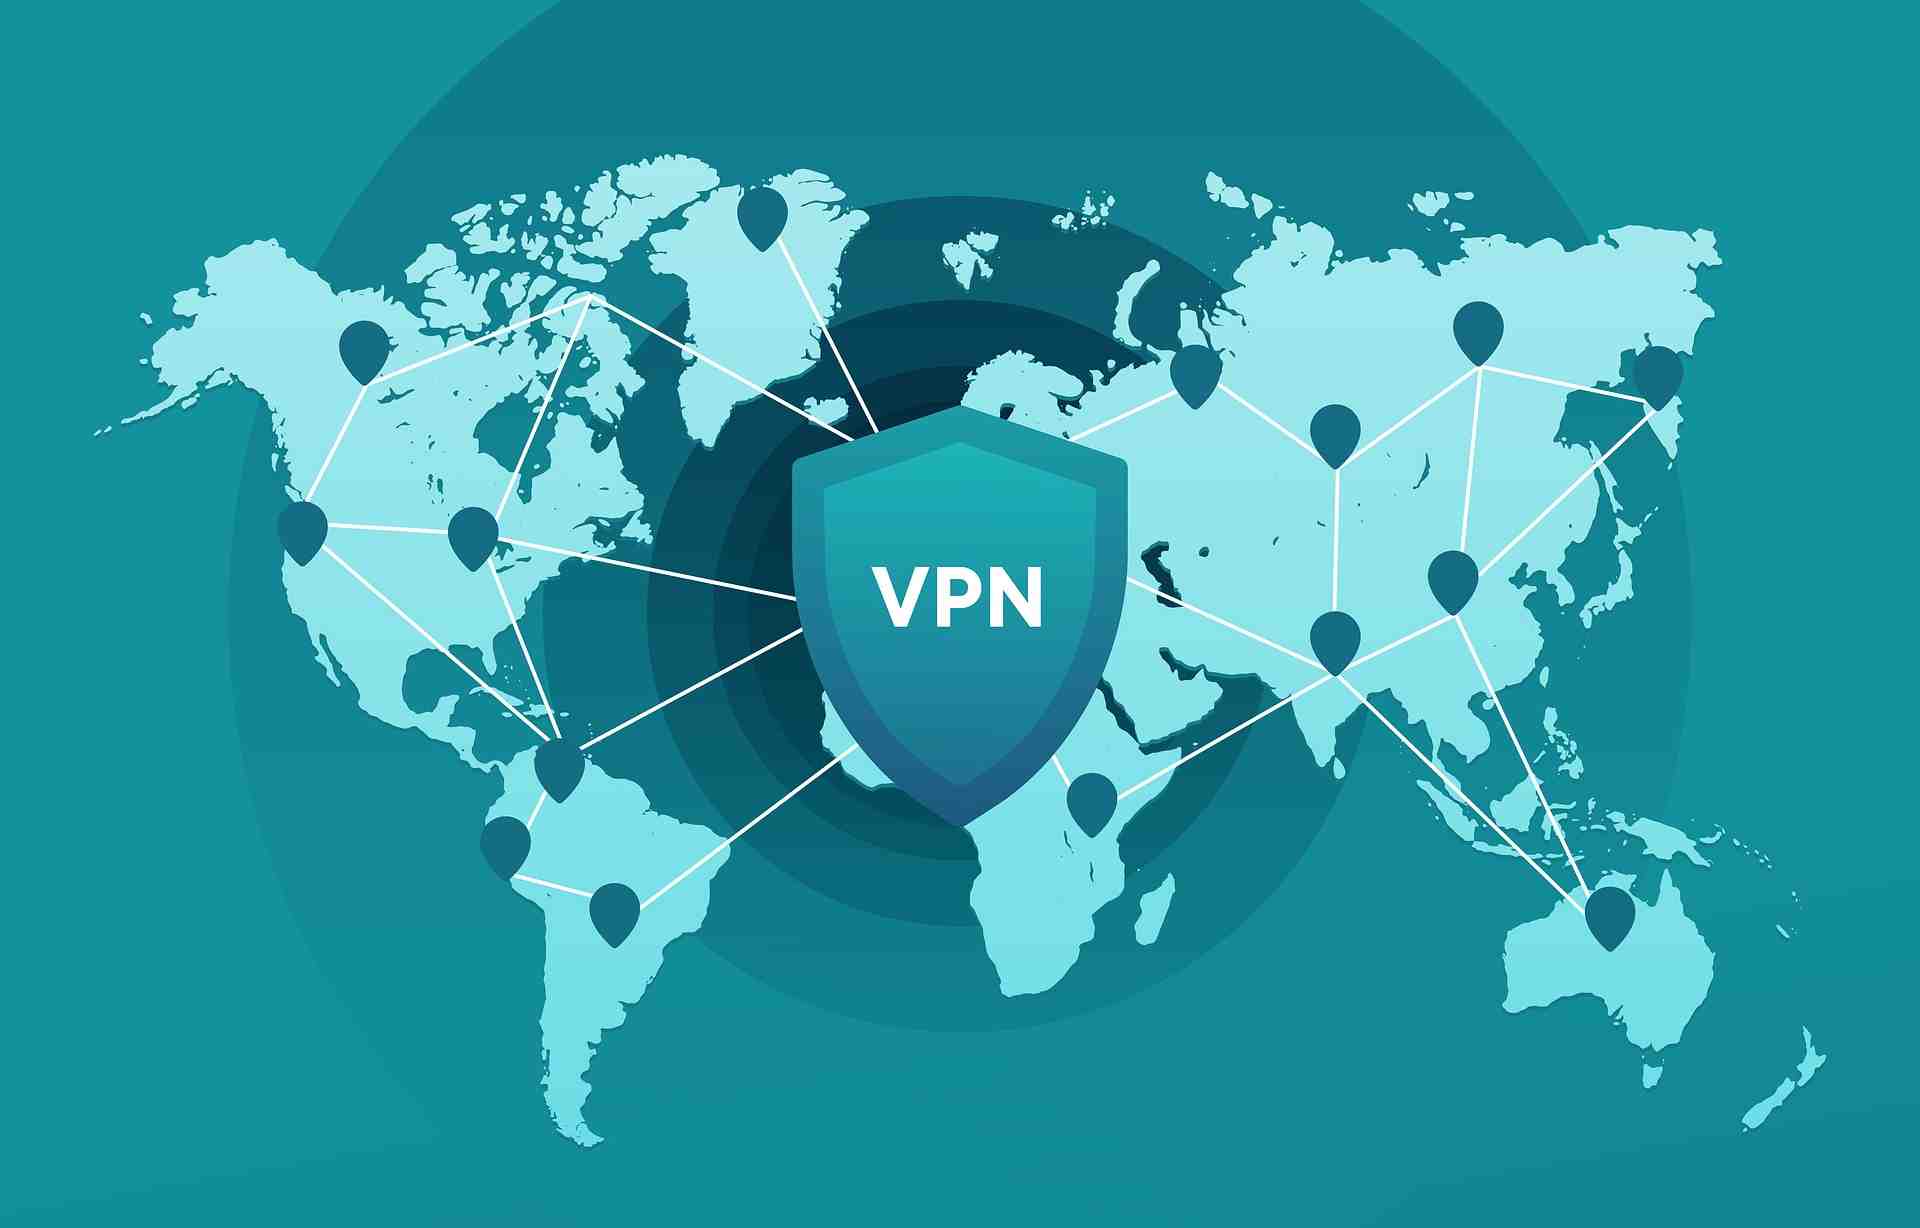 Does Microsoft have a free VPN?